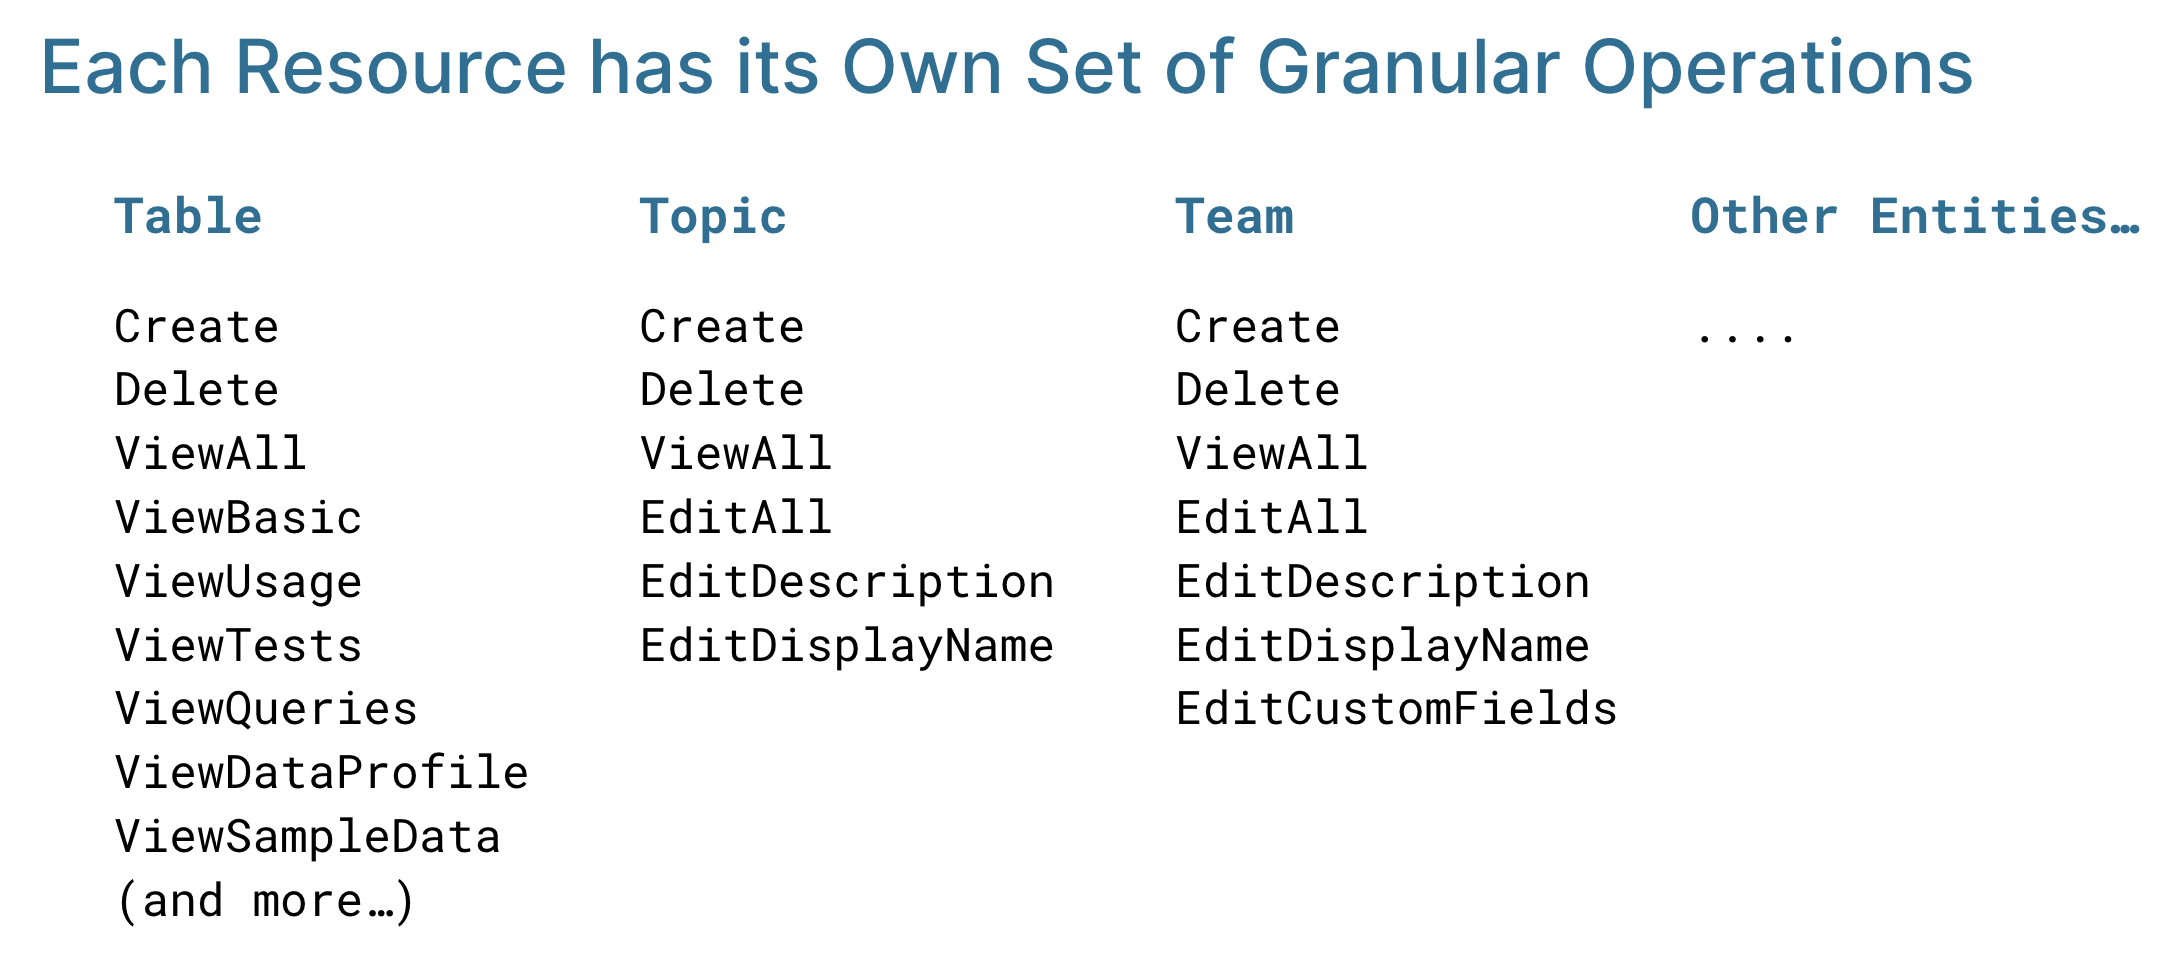 Each Resource has its Own Set of Granular Operations